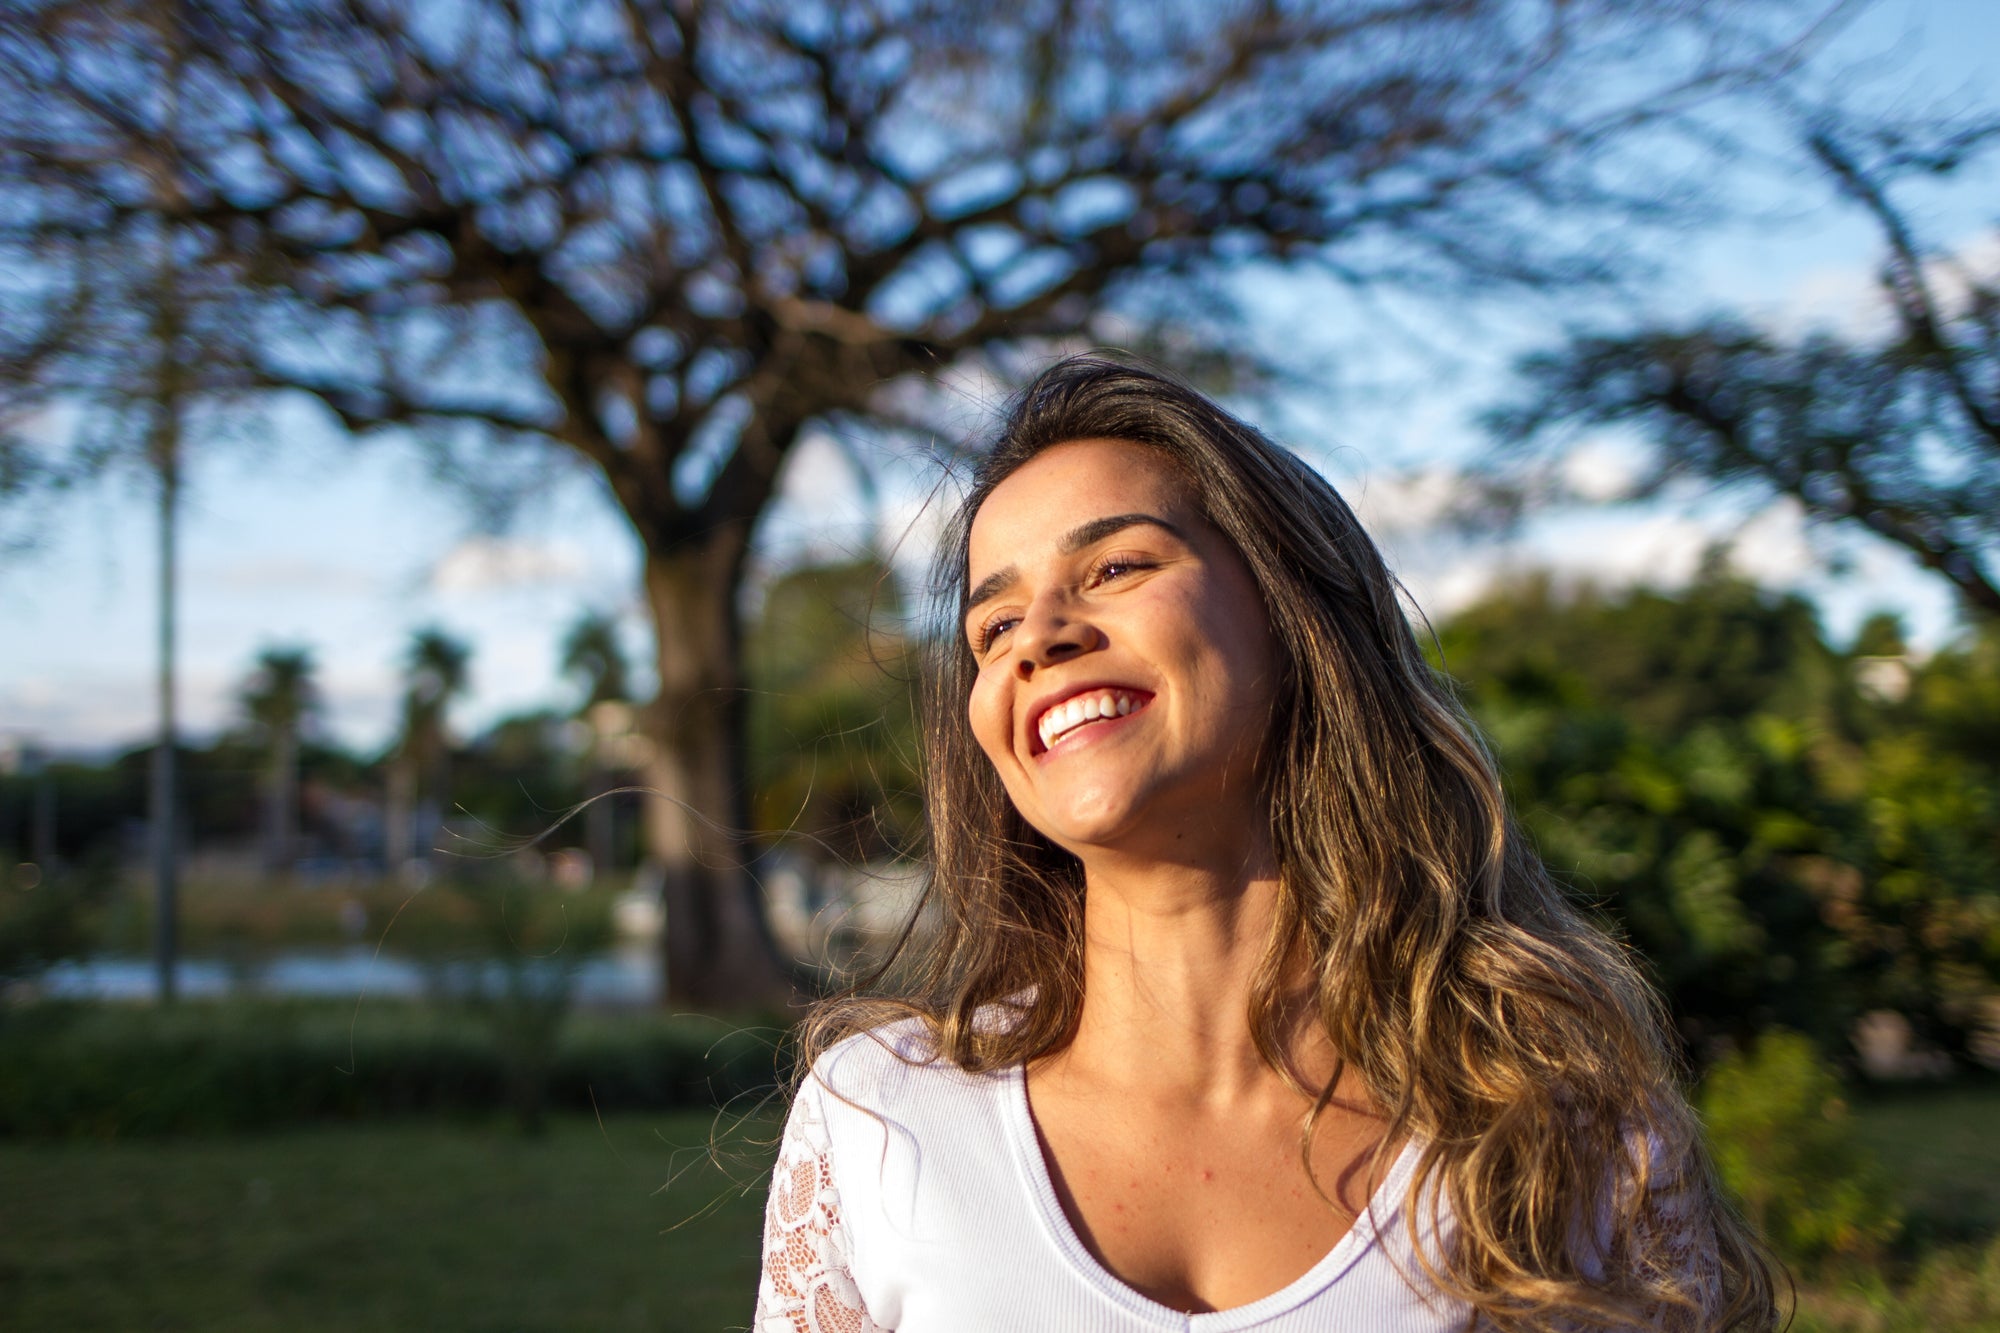 4 Things a Happy Mood Will Improve In Your Life